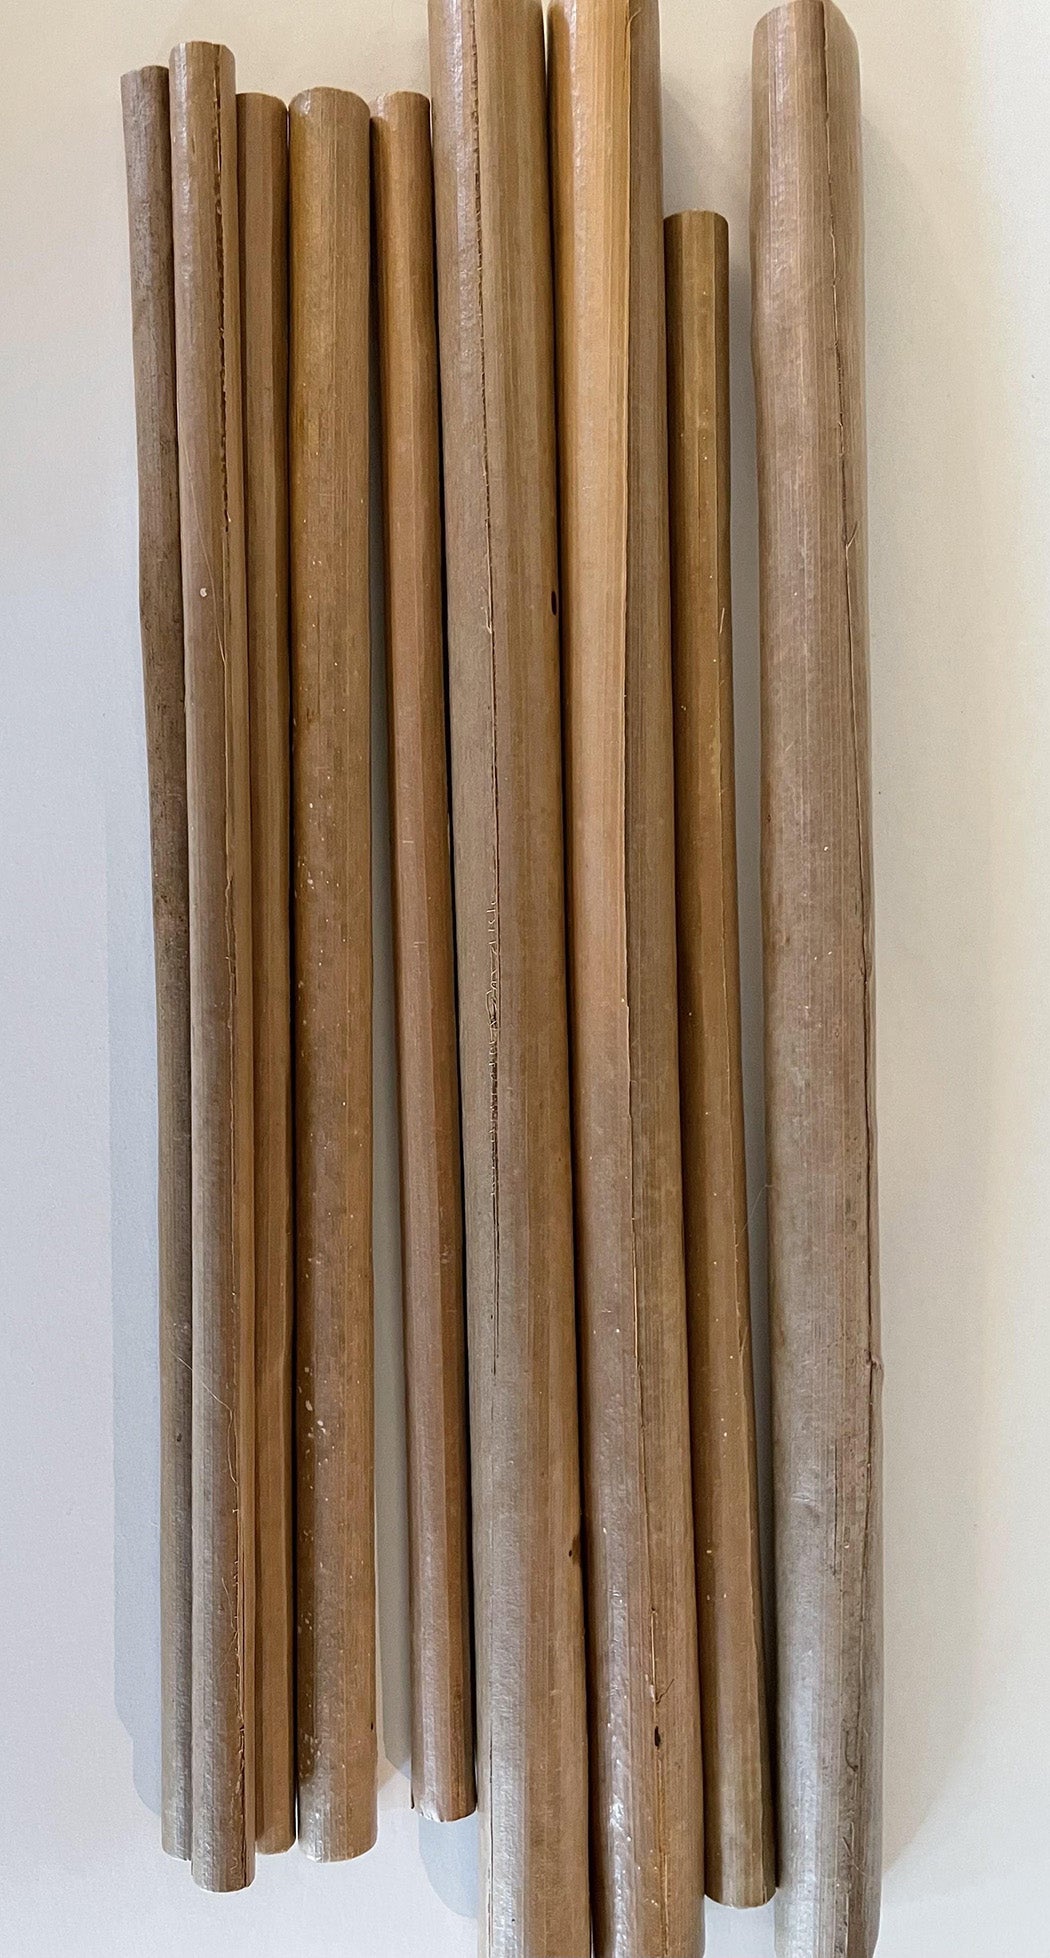 Straws made from dried fallen coconut leaves in a chemical-free process. The straws stay intact in beverage for 3 hours and has a shelf life of 9 months